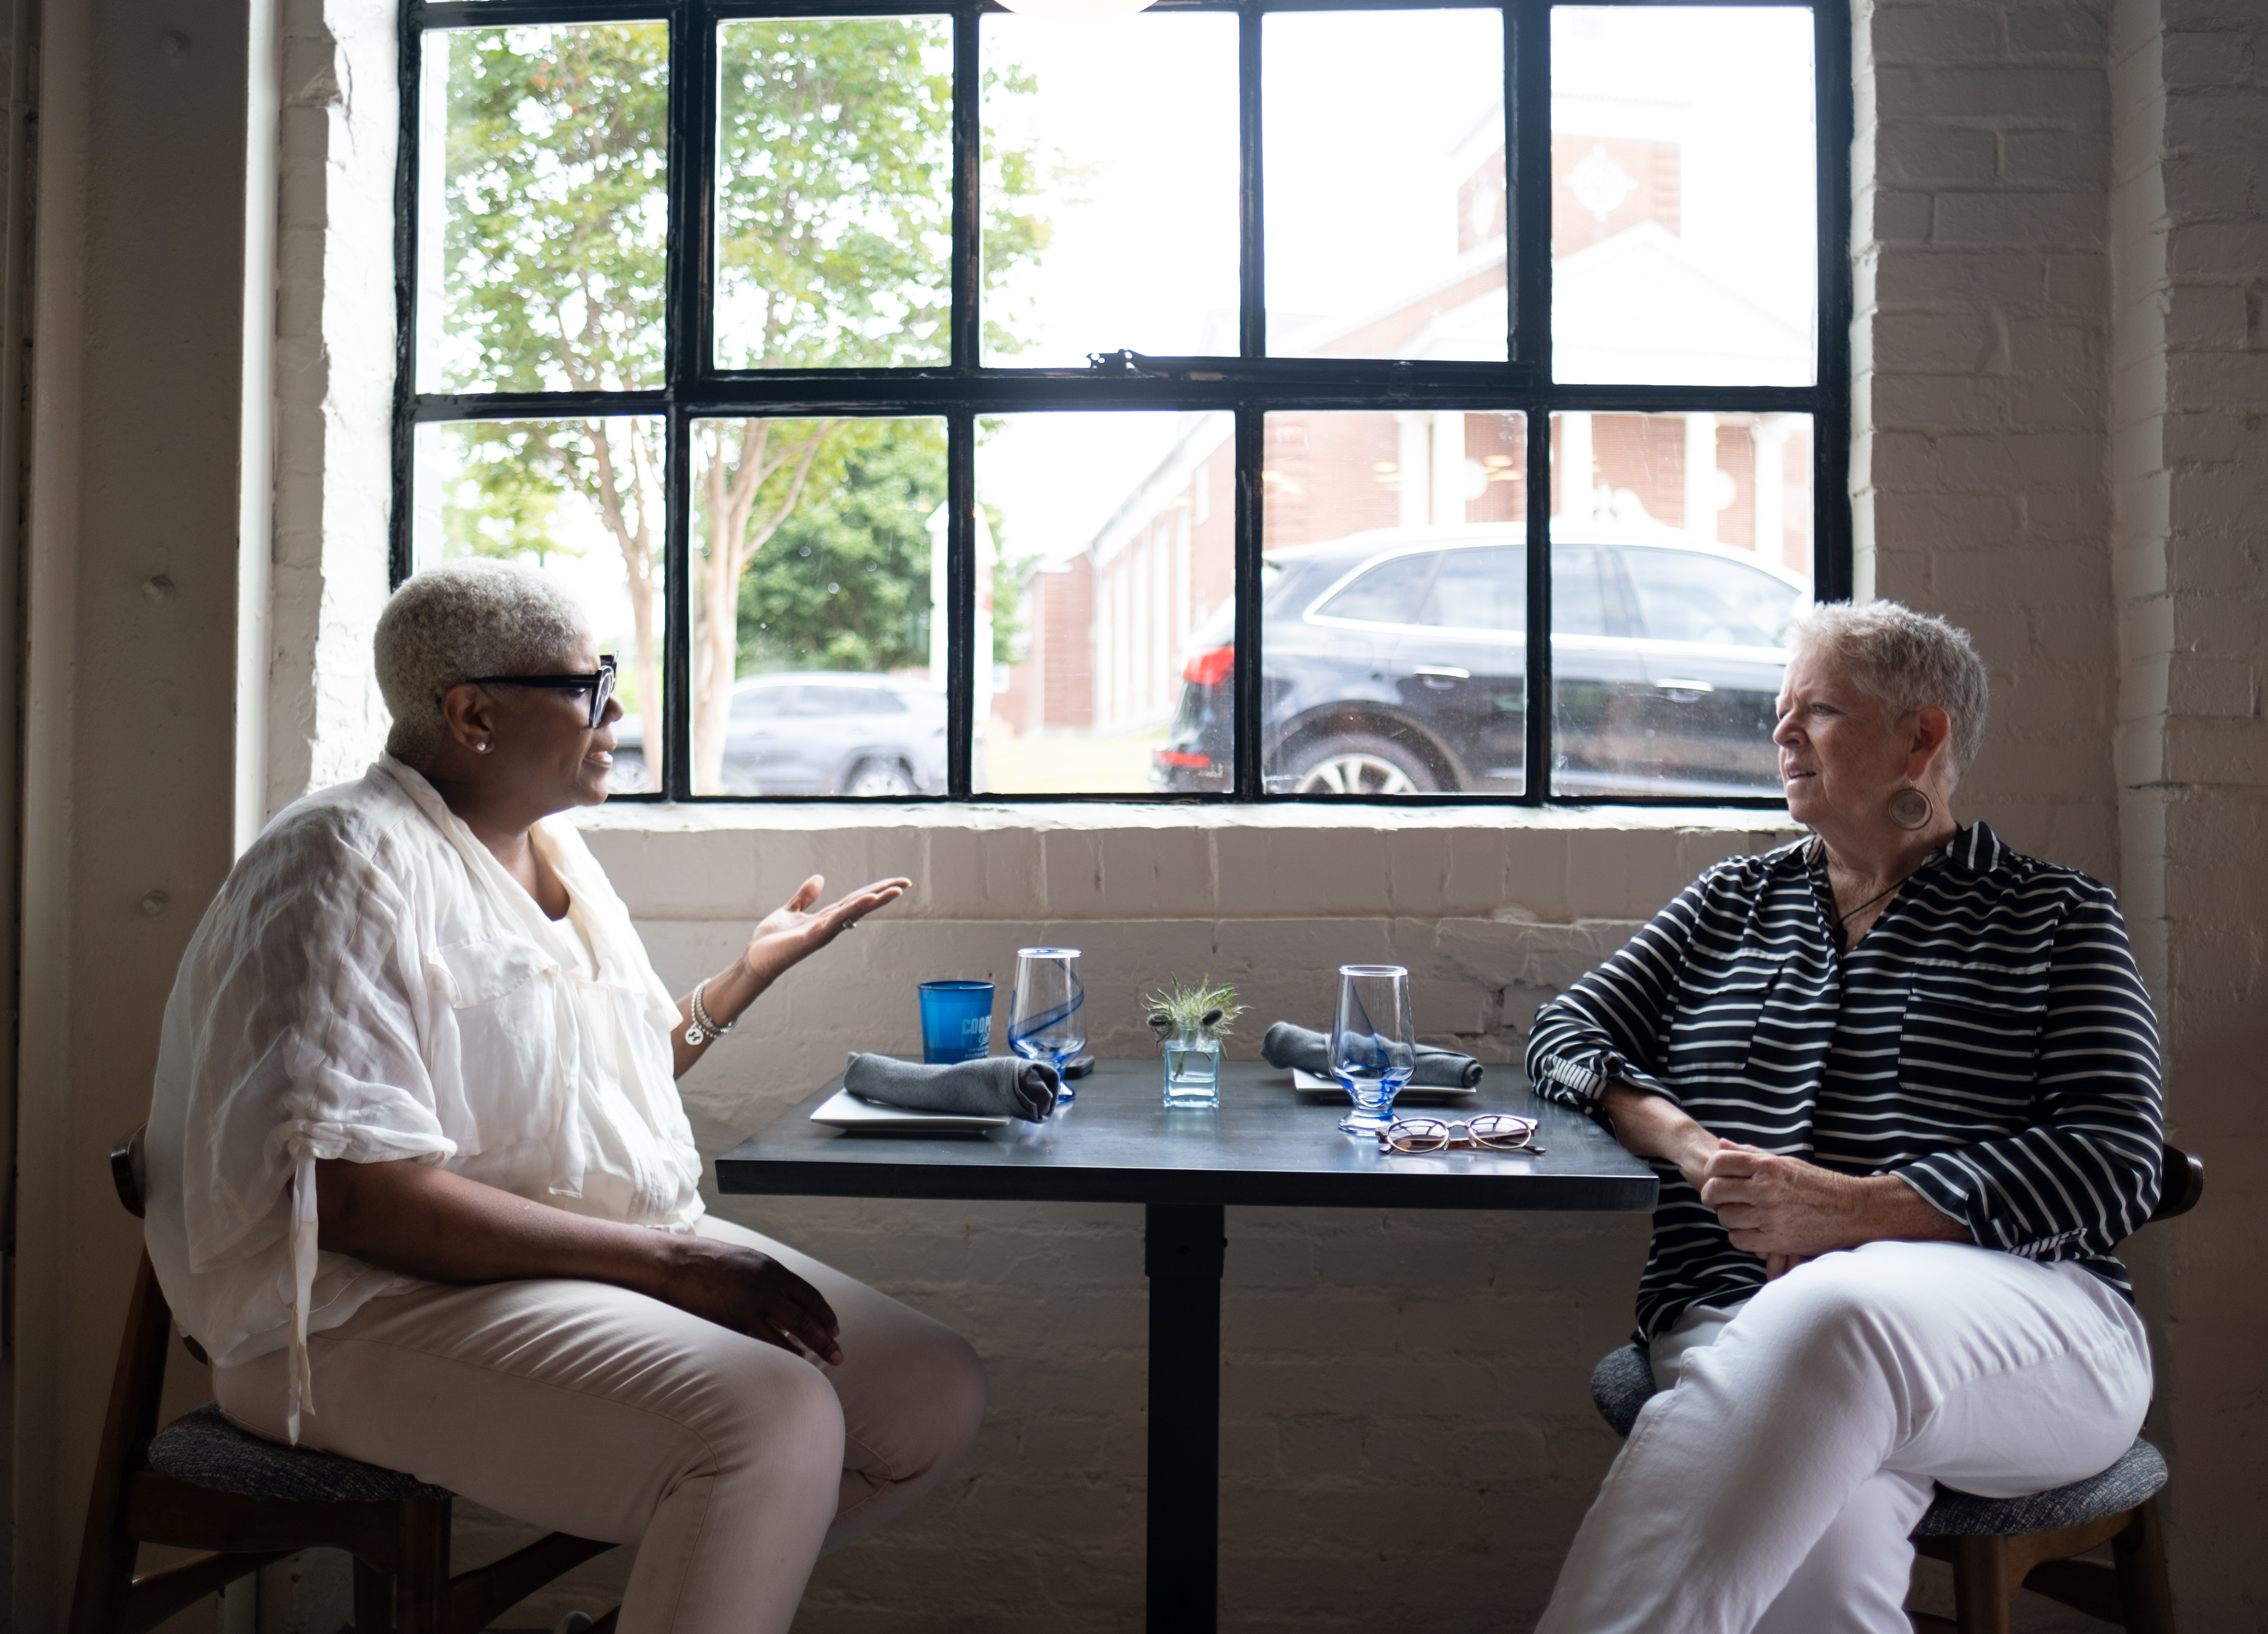 Oreatha’s at the Point co-owners Deborah VanTrece, left, and Shea Embry chat before the restaurant opens for brunch. Ben Gray for the Atlanta Journal-Constitution